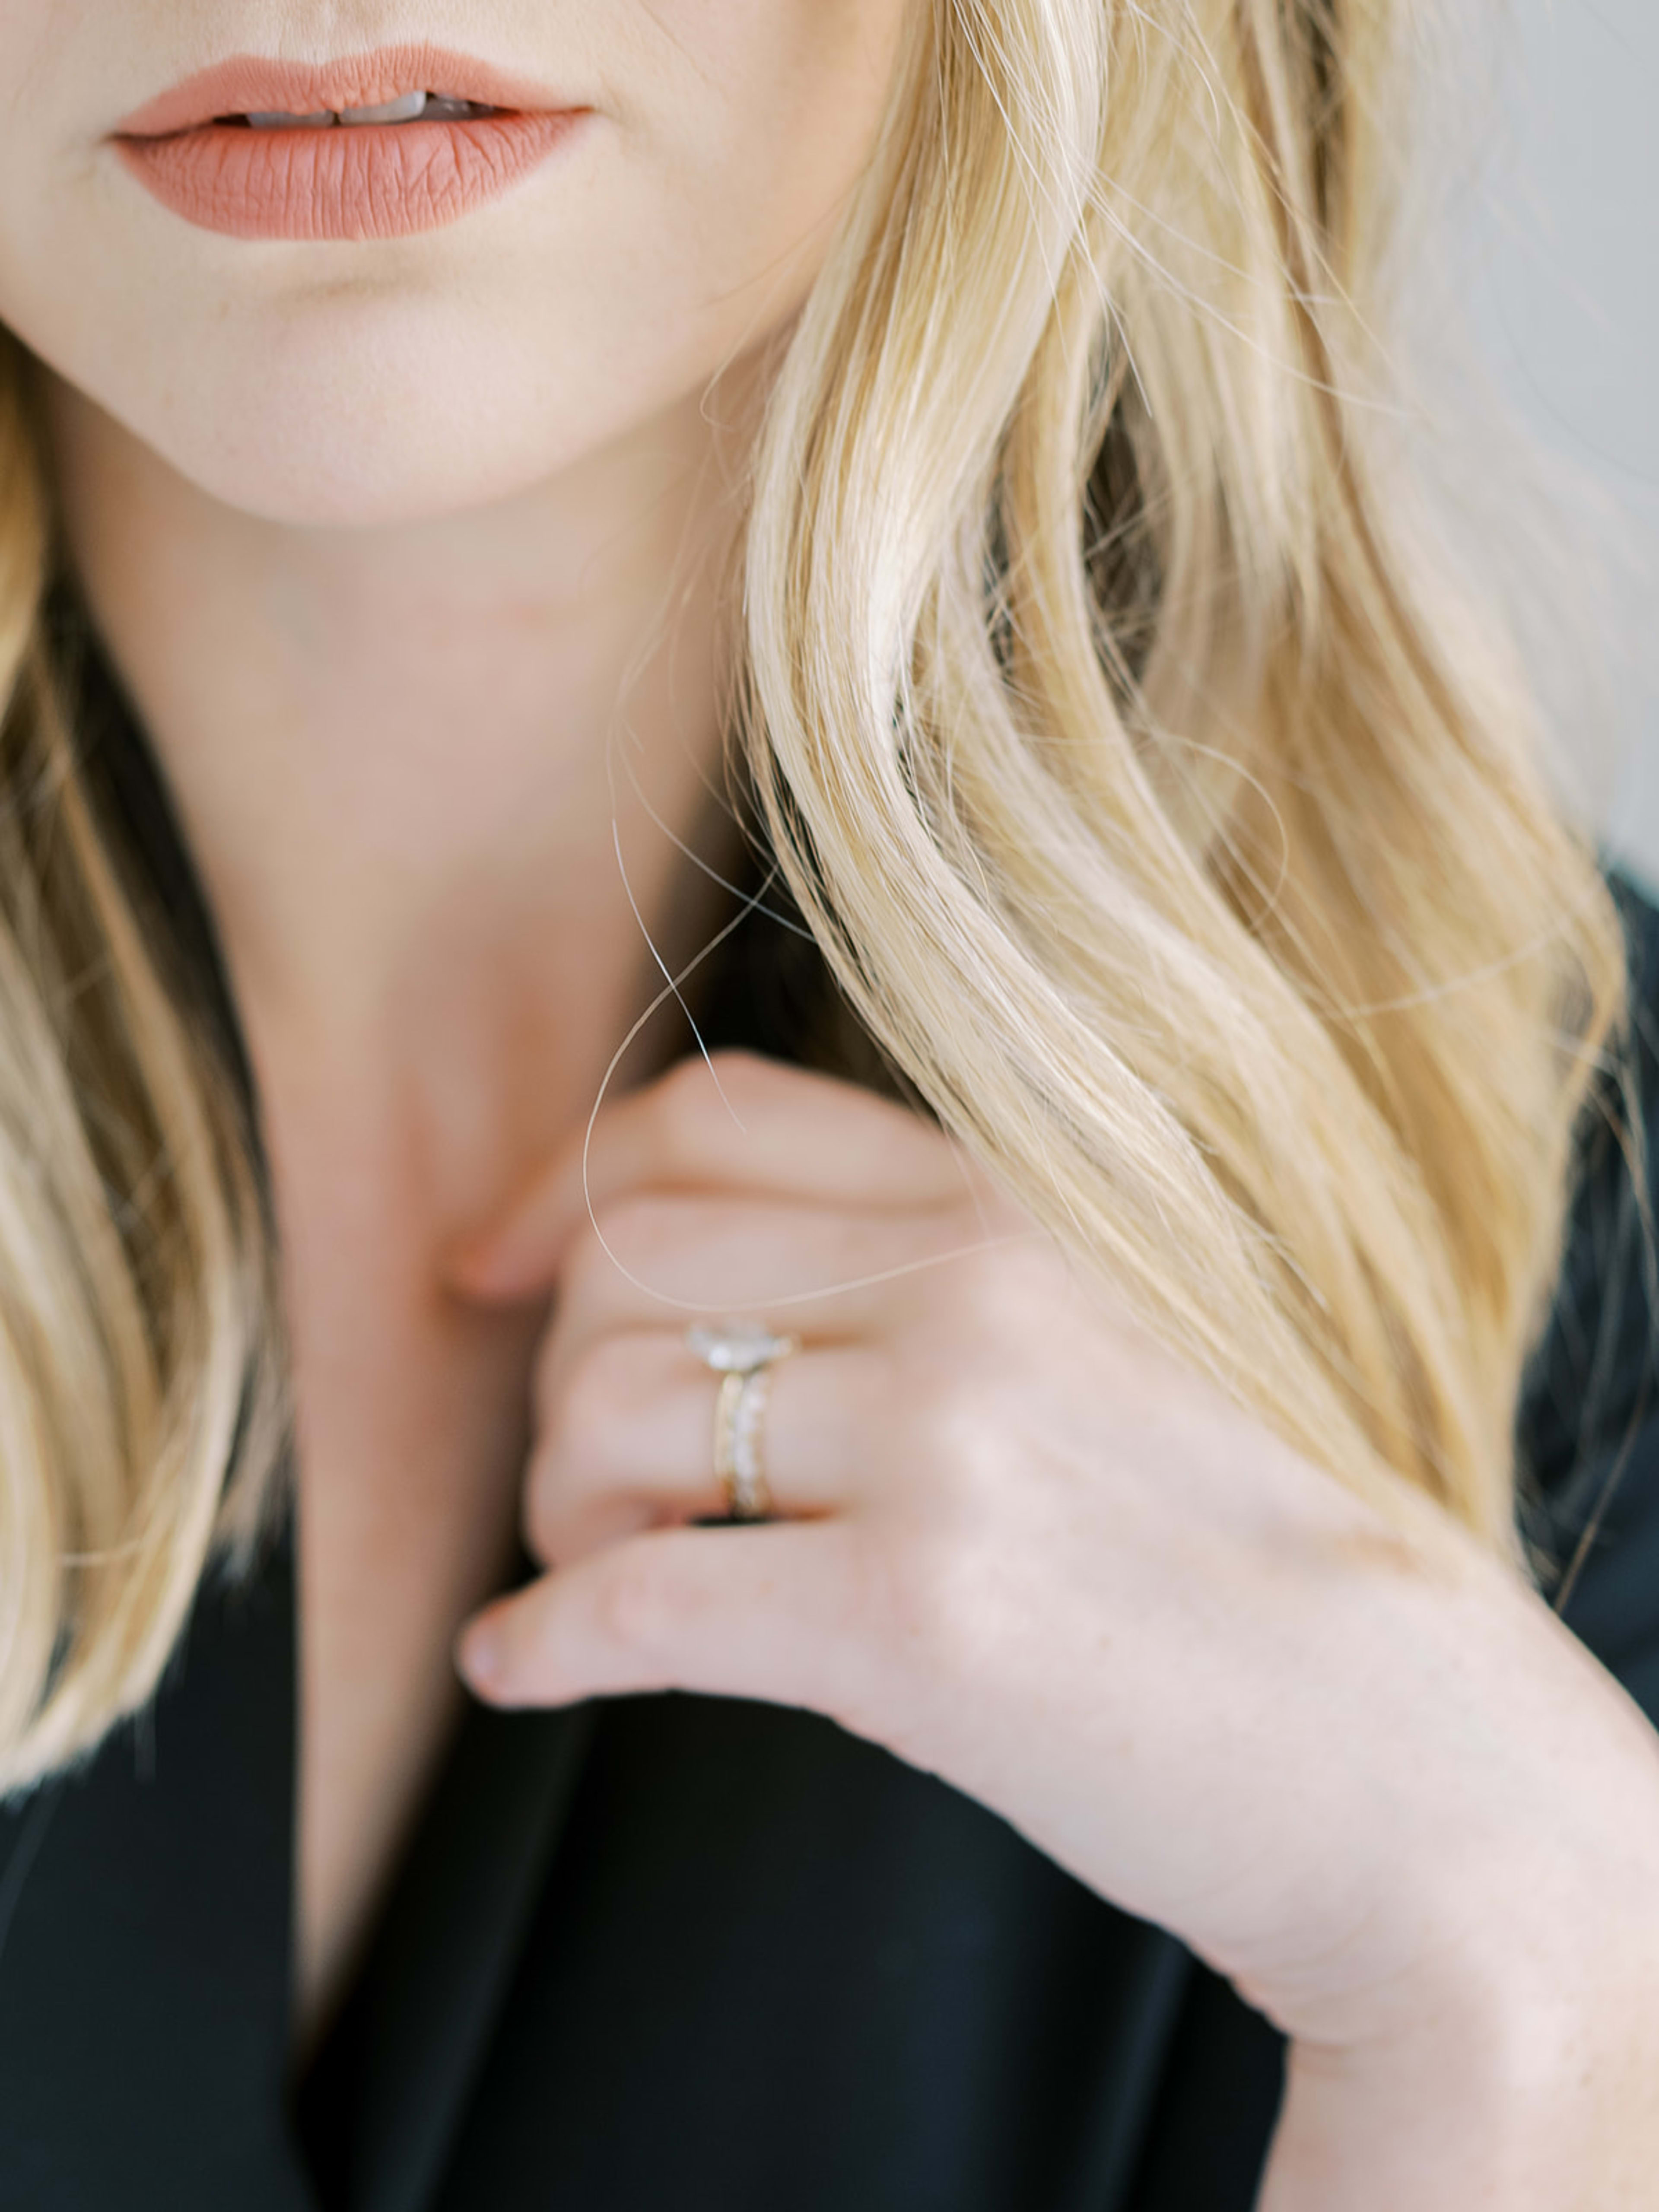 A woman with a ring on her finger during a photoshoot.